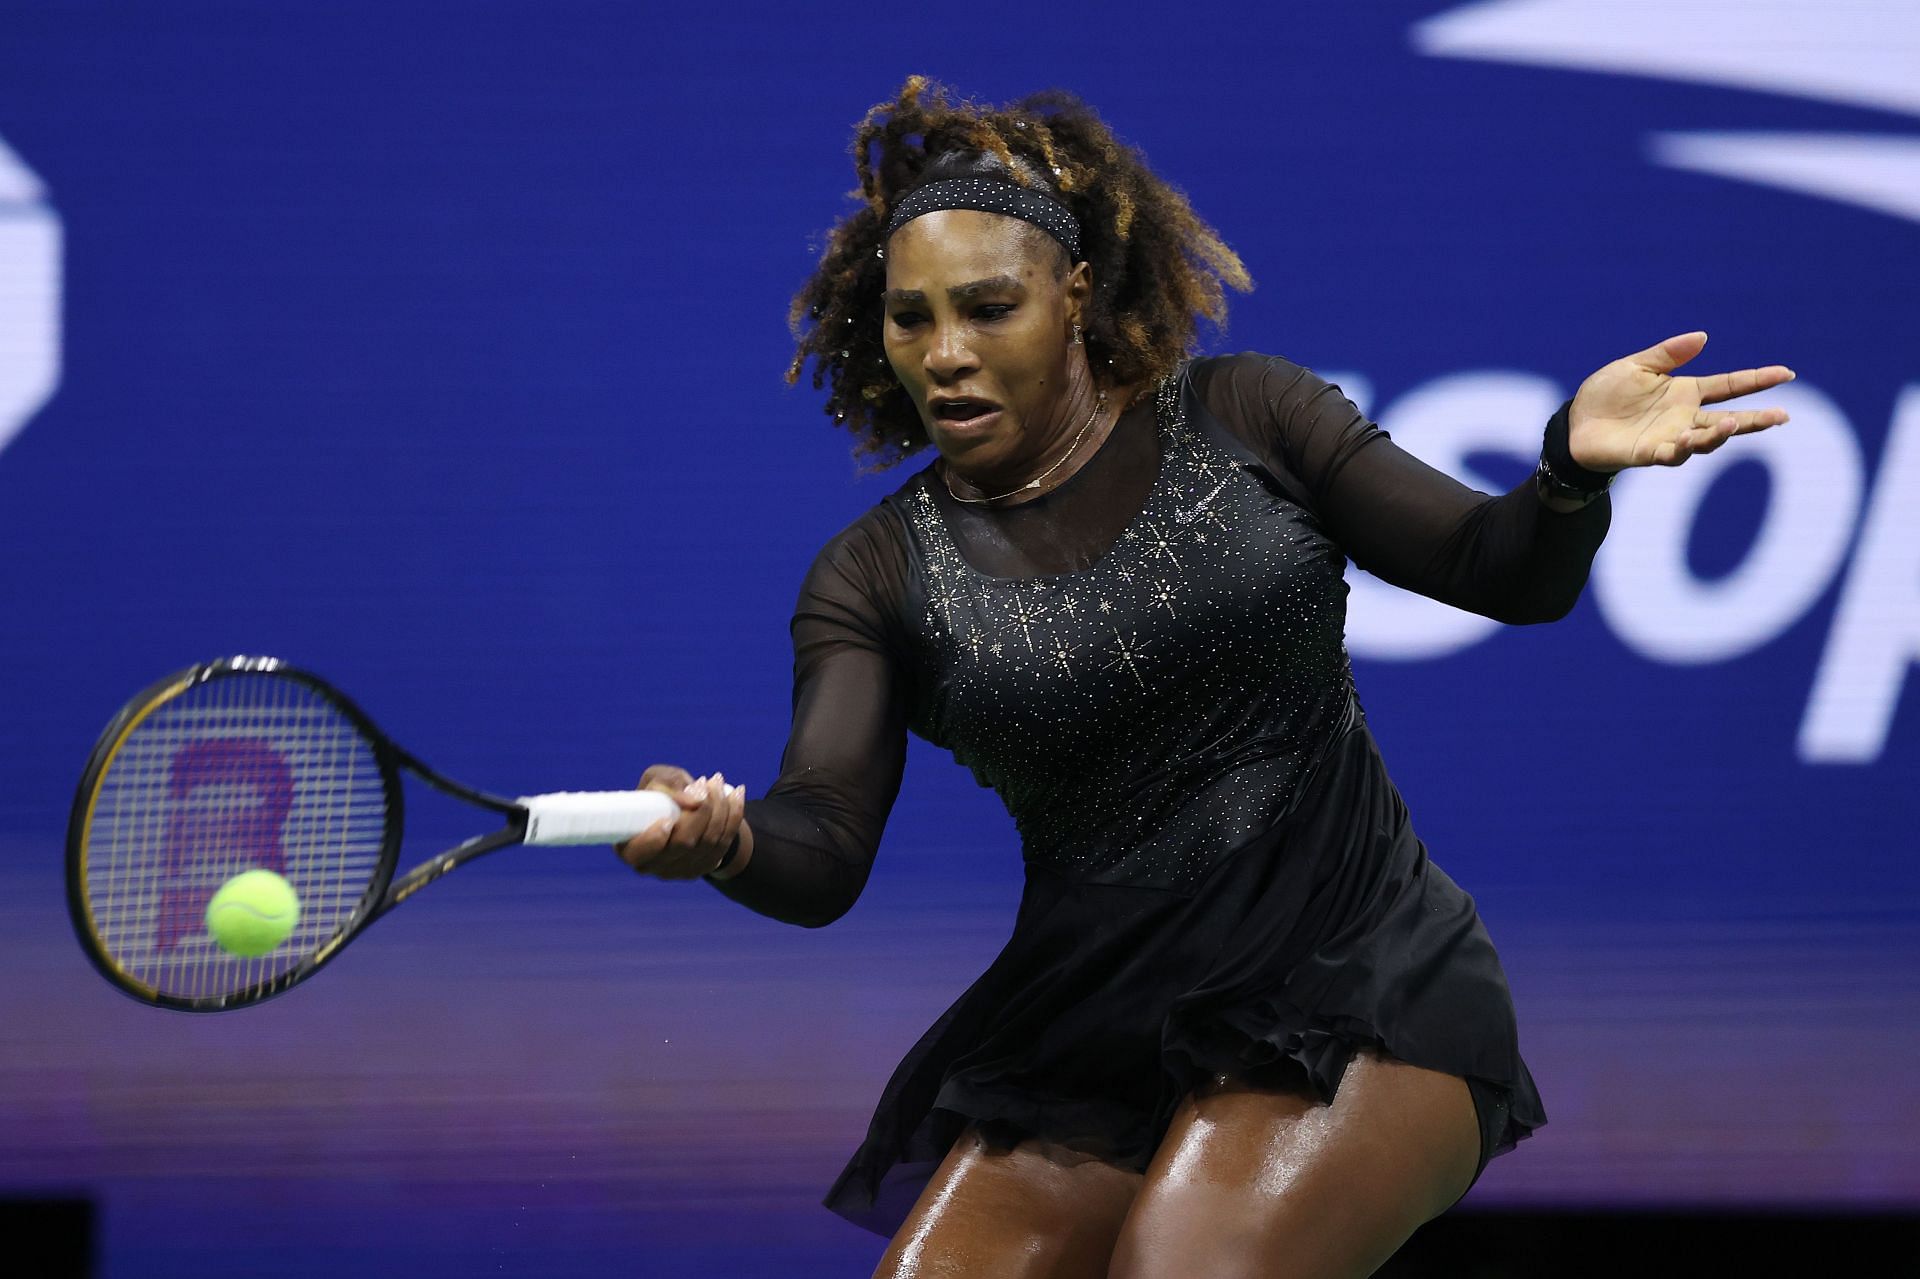 Serena Williams in action at the 2022 US Open.